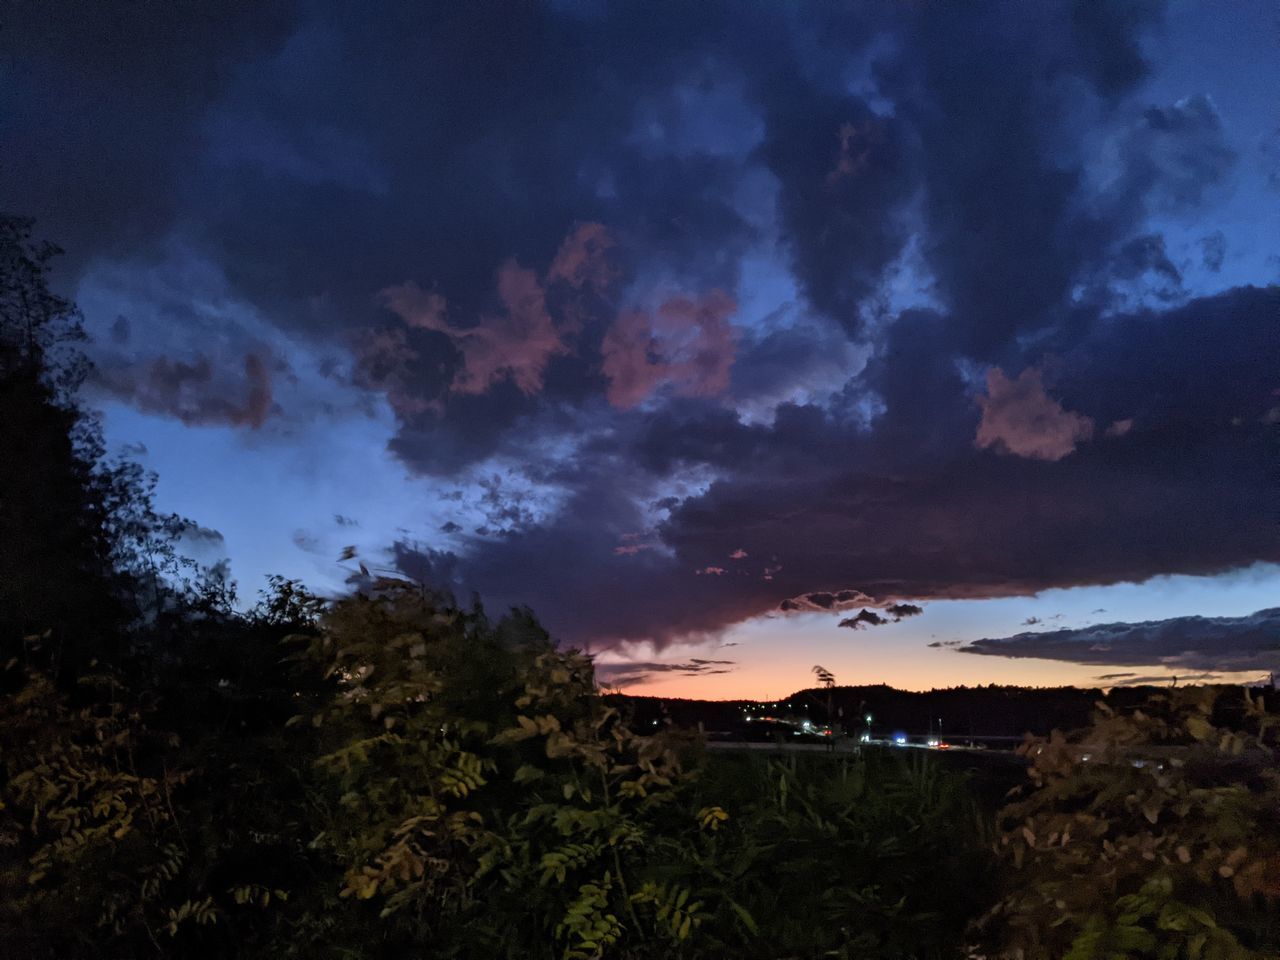 sky, cloud, environment, landscape, evening, nature, sunset, beauty in nature, dusk, scenics - nature, plant, land, dramatic sky, night, horizon, no people, darkness, tree, mountain, storm, outdoors, cloudscape, tranquility, blue, storm cloud, dark